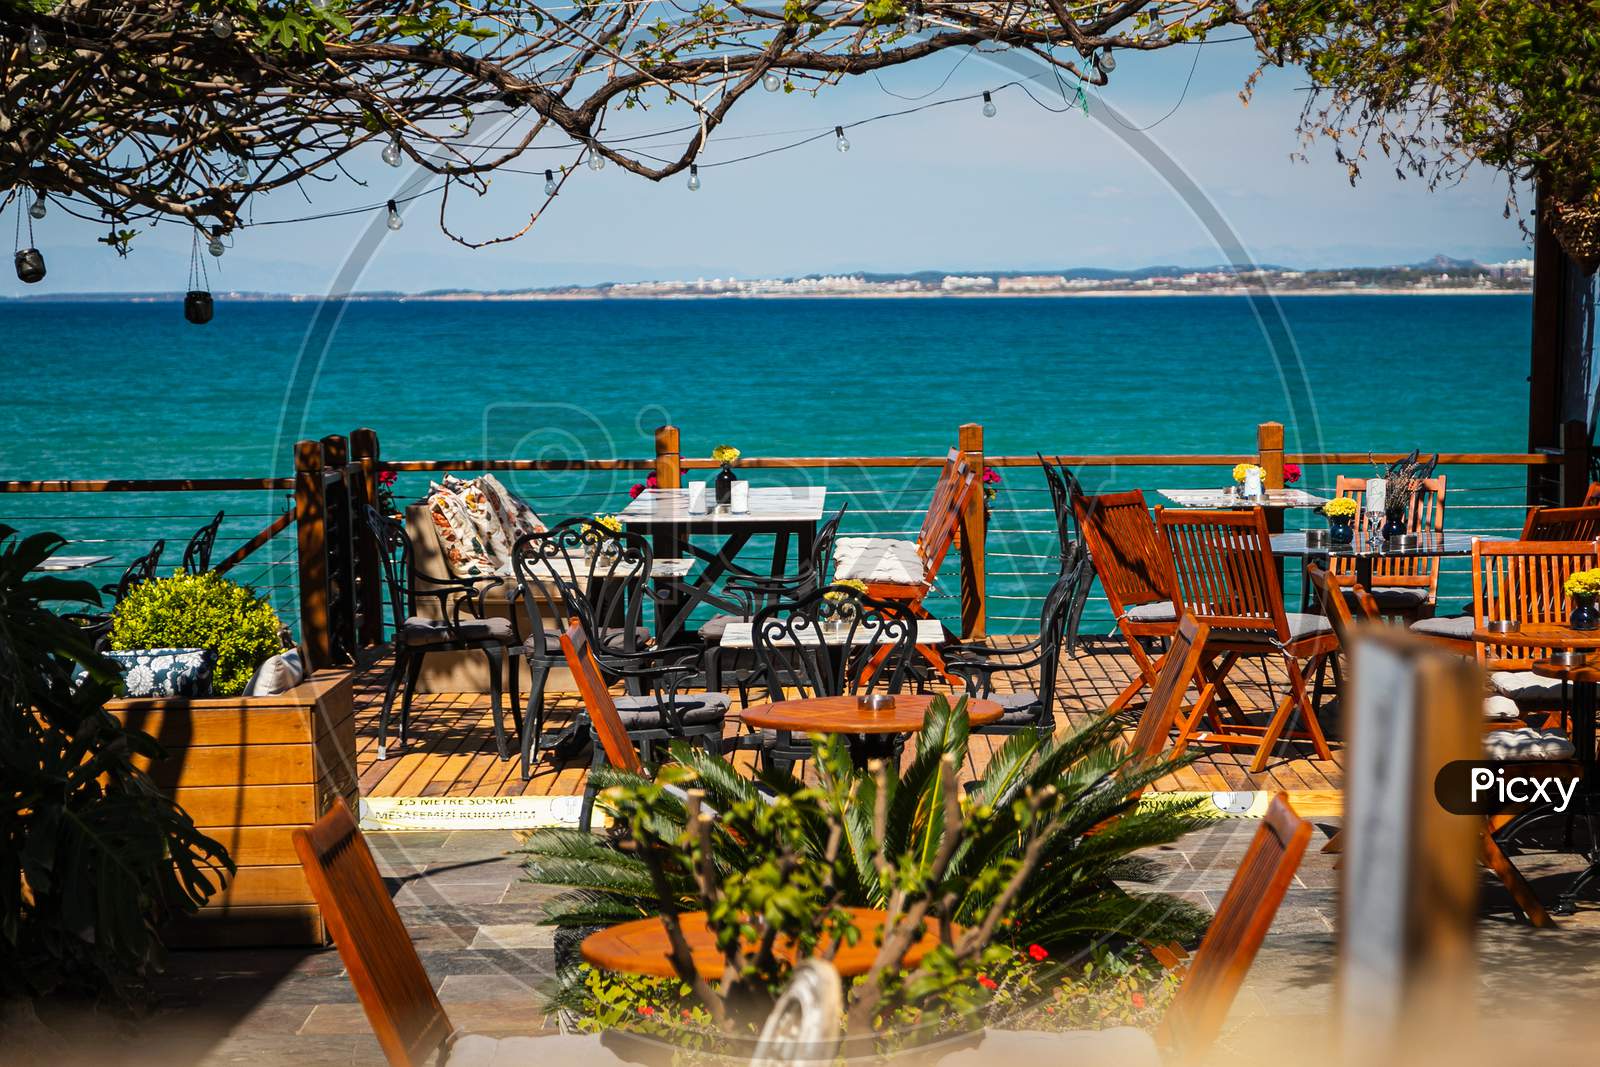 The Concept Of A Measured Rest On The Seashore. The Perfect Place For A Date. Restaurant With Wooden Furniture, Lanterns, Palm Trees And Vegetation On The Seaside Of The Ancient City